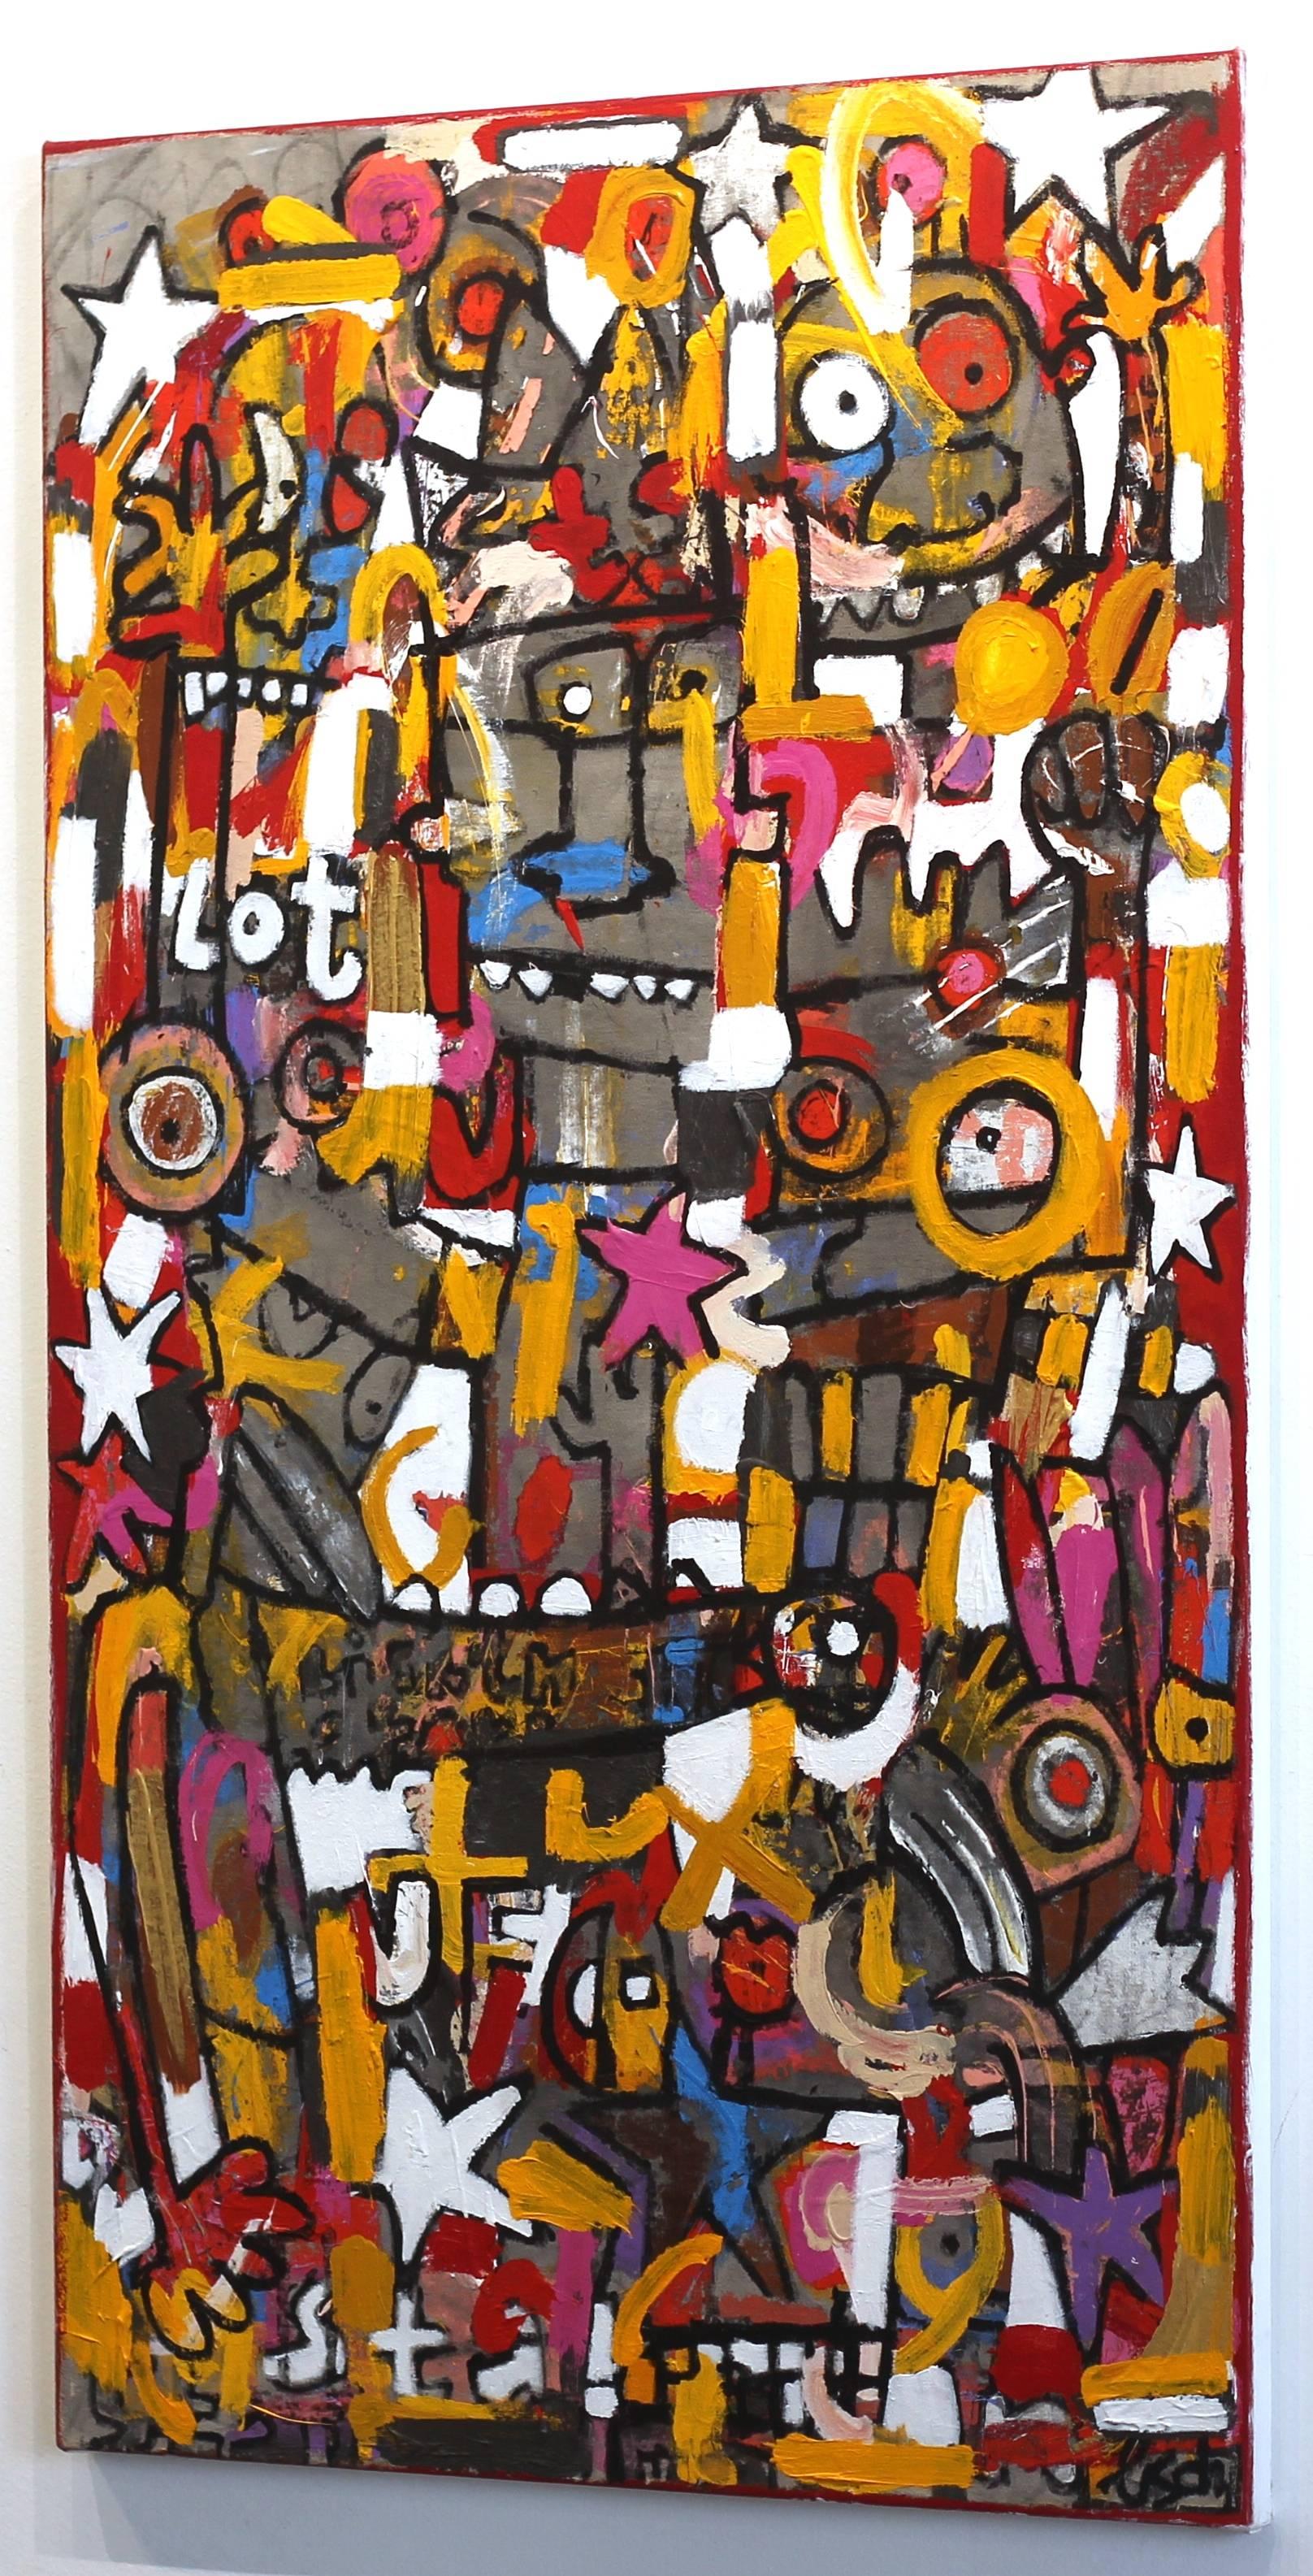 Swedish artist Jonas Fisch’s imagery is vibrantly buzzing with colorful commentary on society, past and present, morphed into figures, words and shapes. His heavily layered canvases are the foundations of a new dialogue.

This 56 inch tall by 33